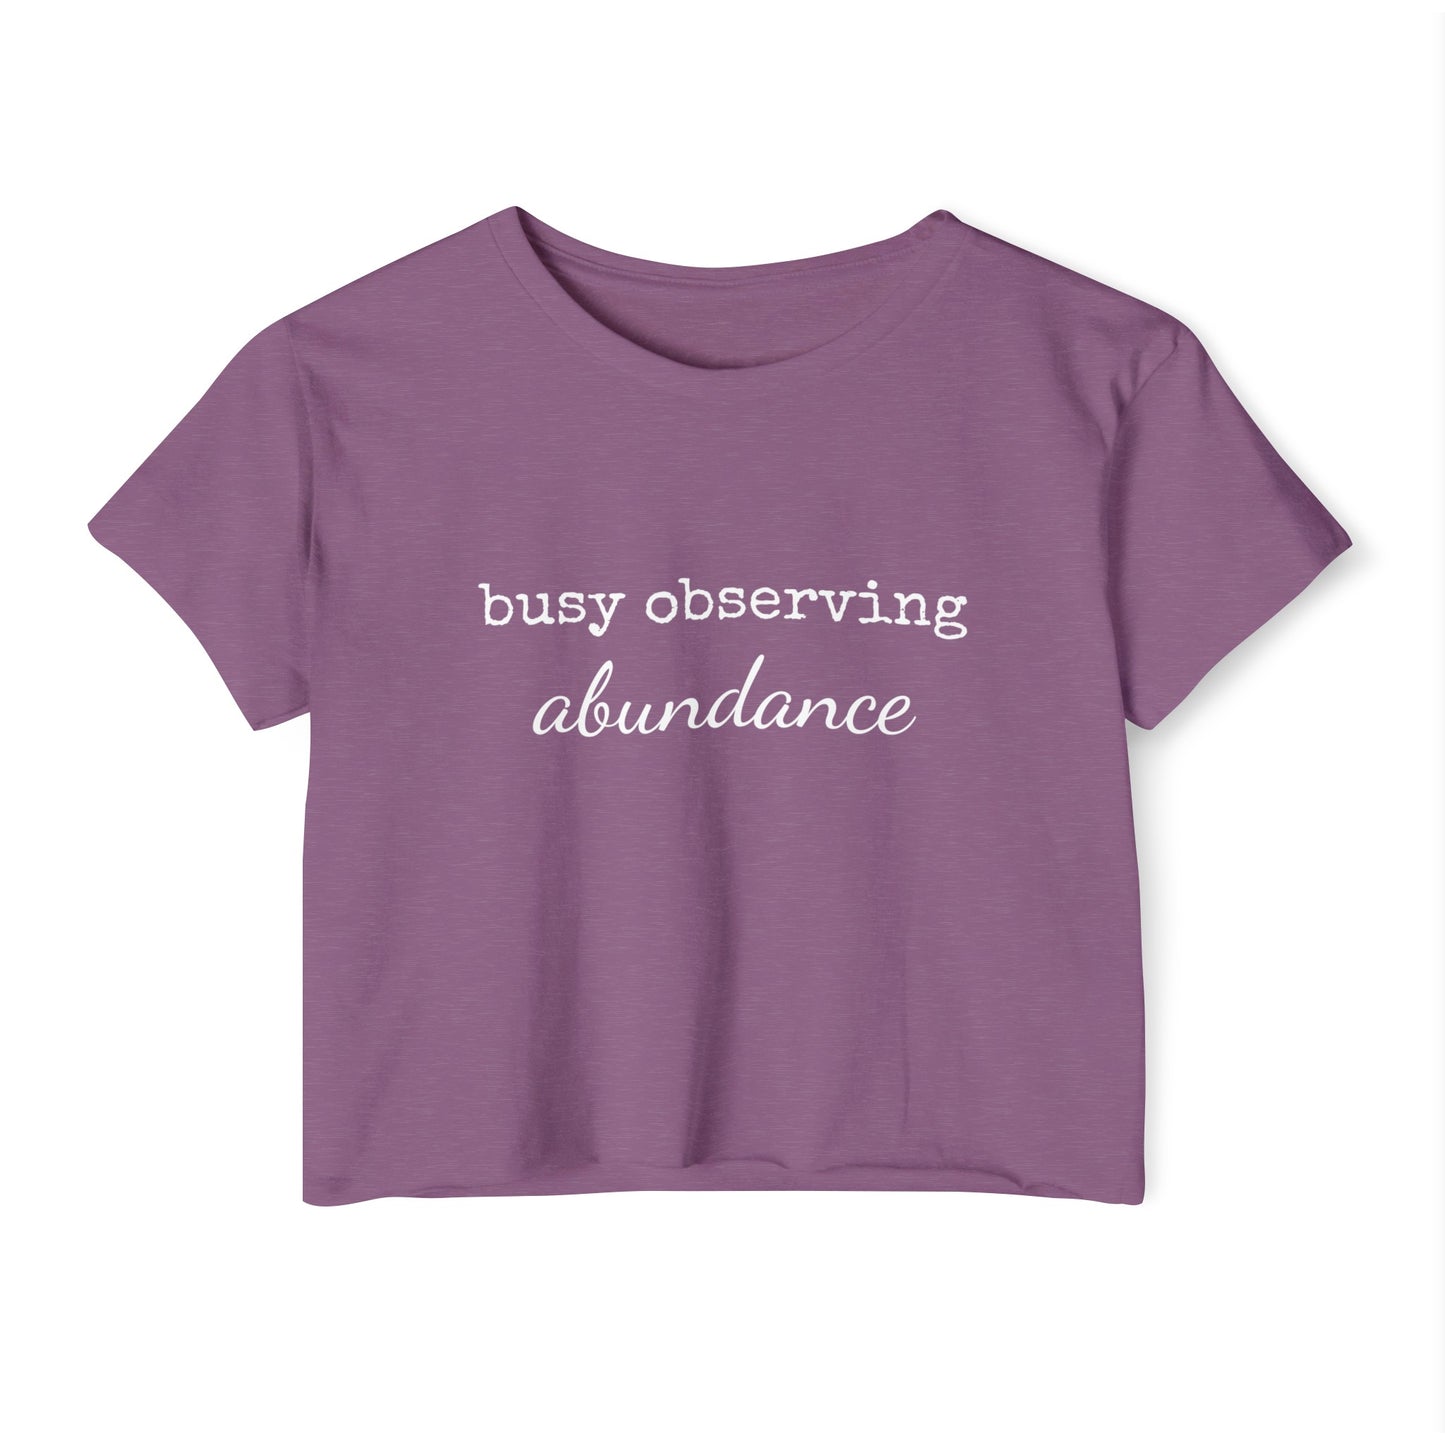 "Busy Observing Abundance" Cropped Tee